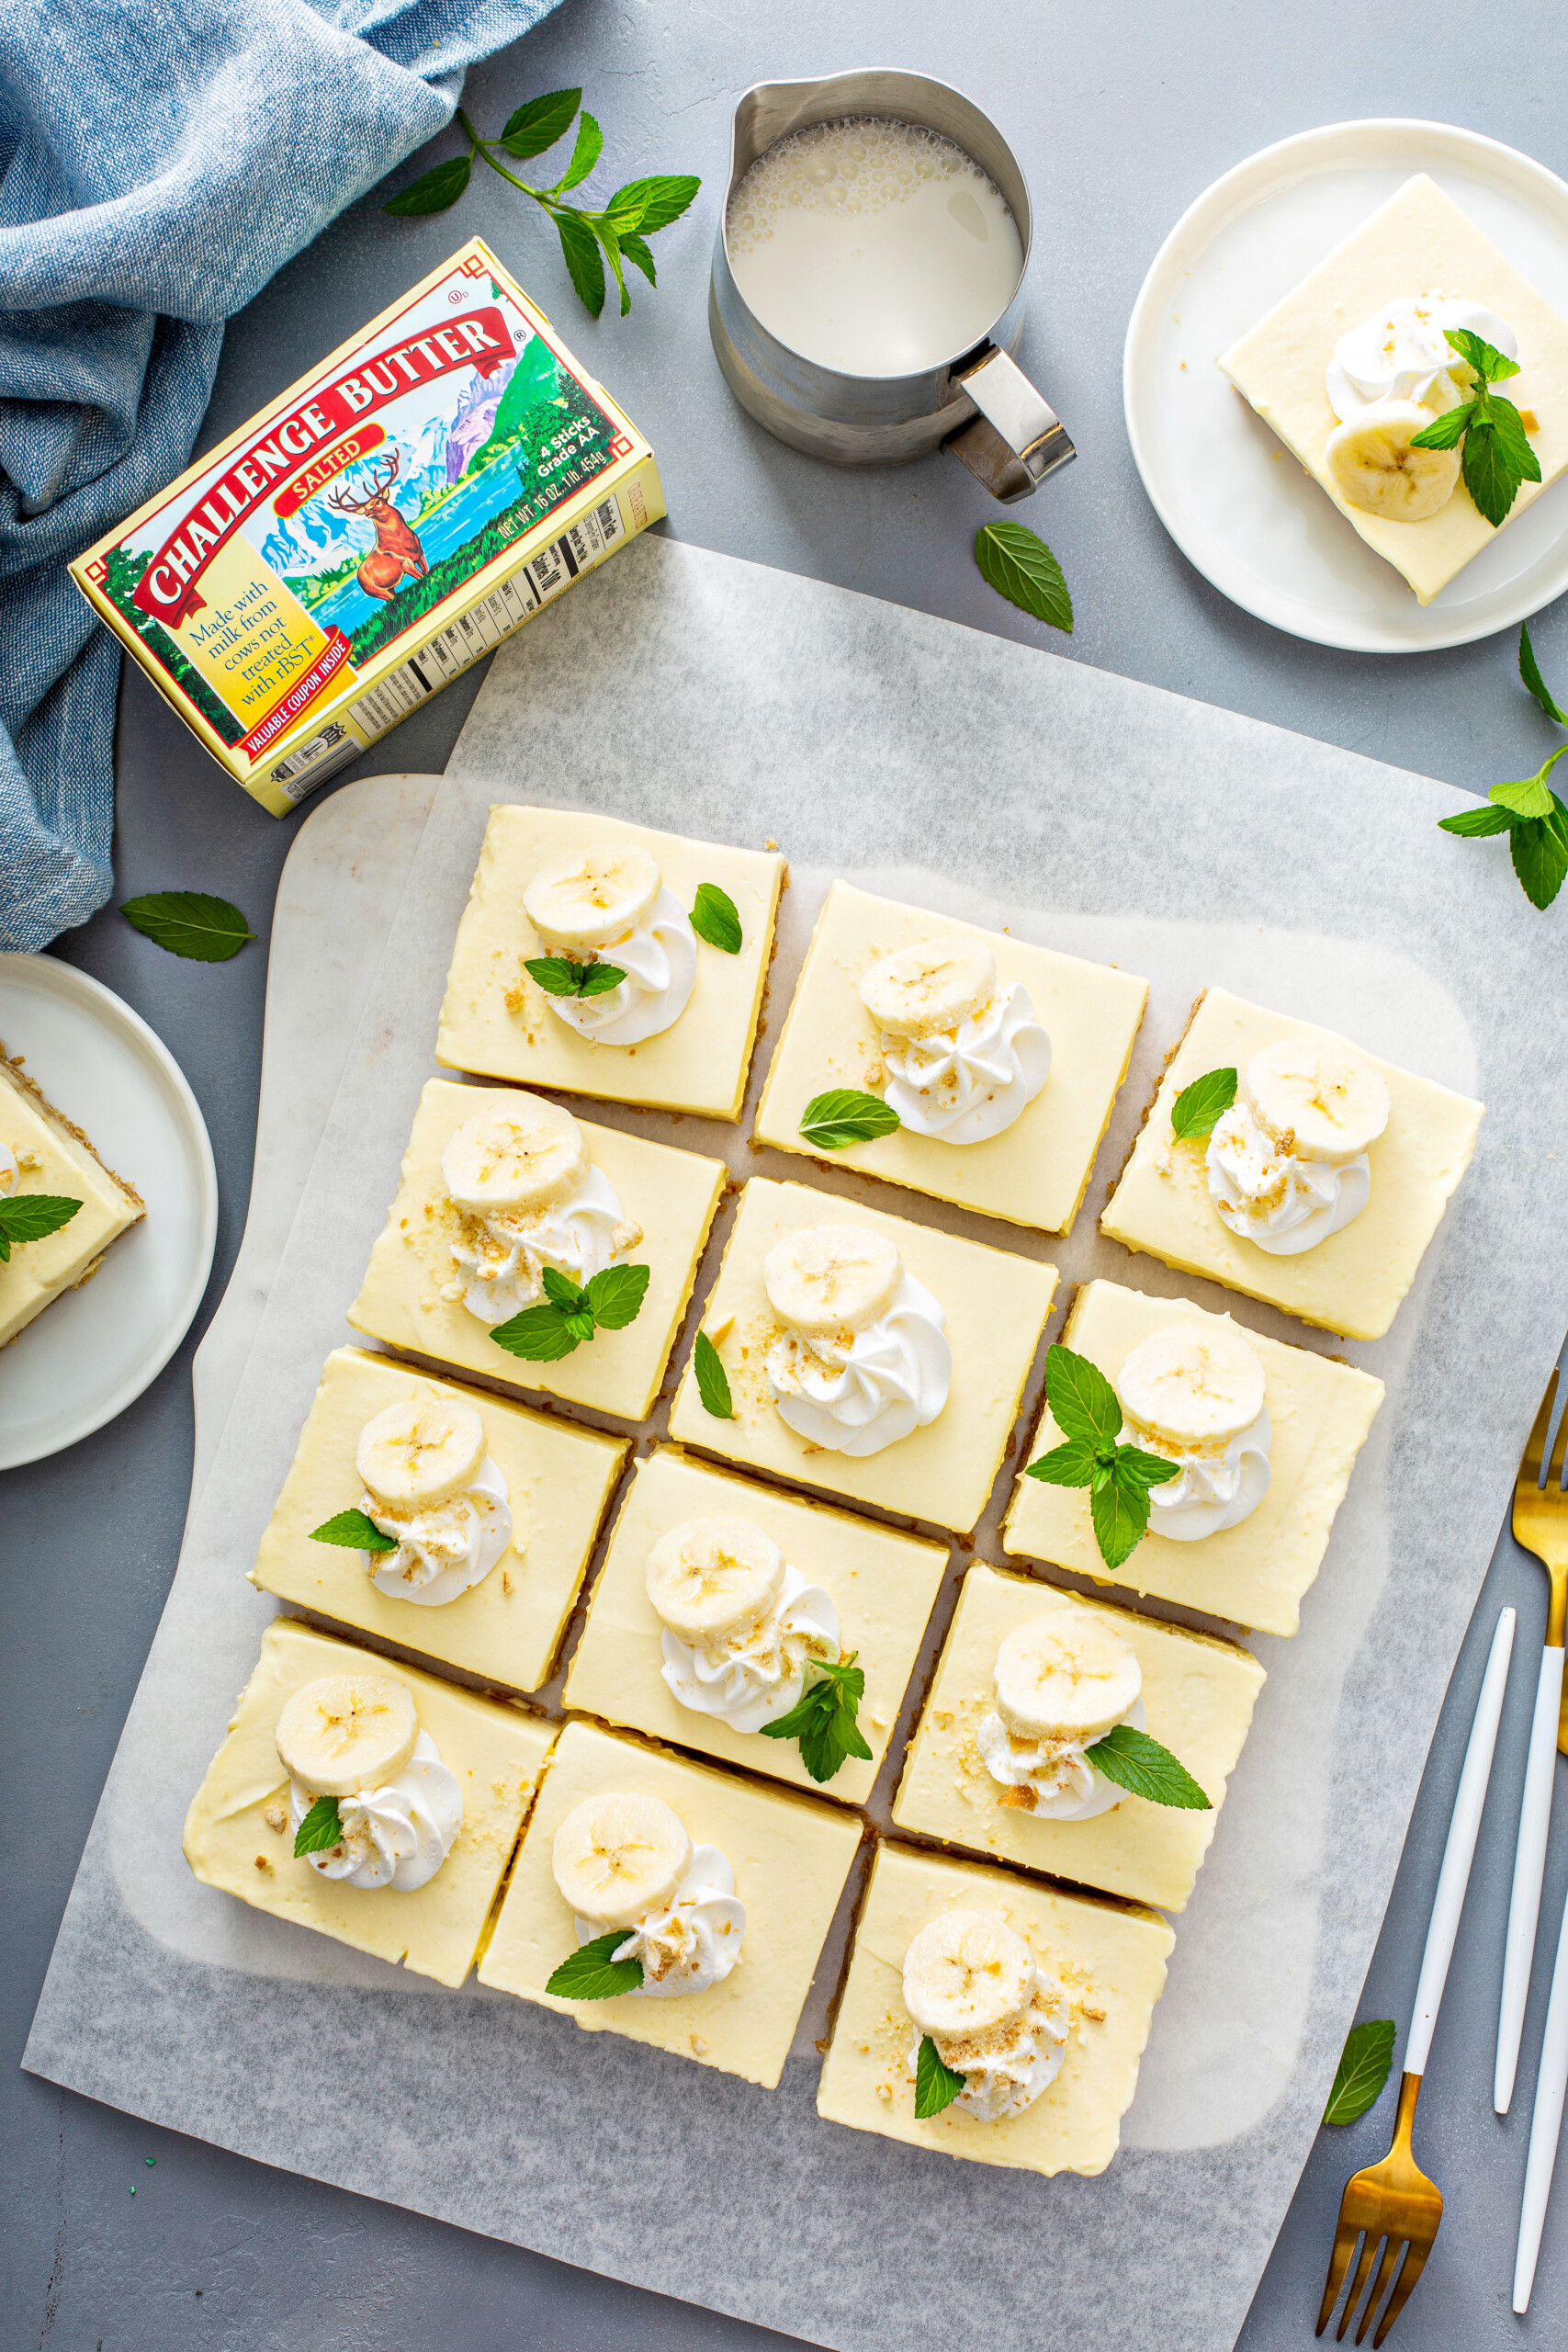 Overhead image of Banana pudding bars are garnished with banana slices, whipped cream and mint sprigs.